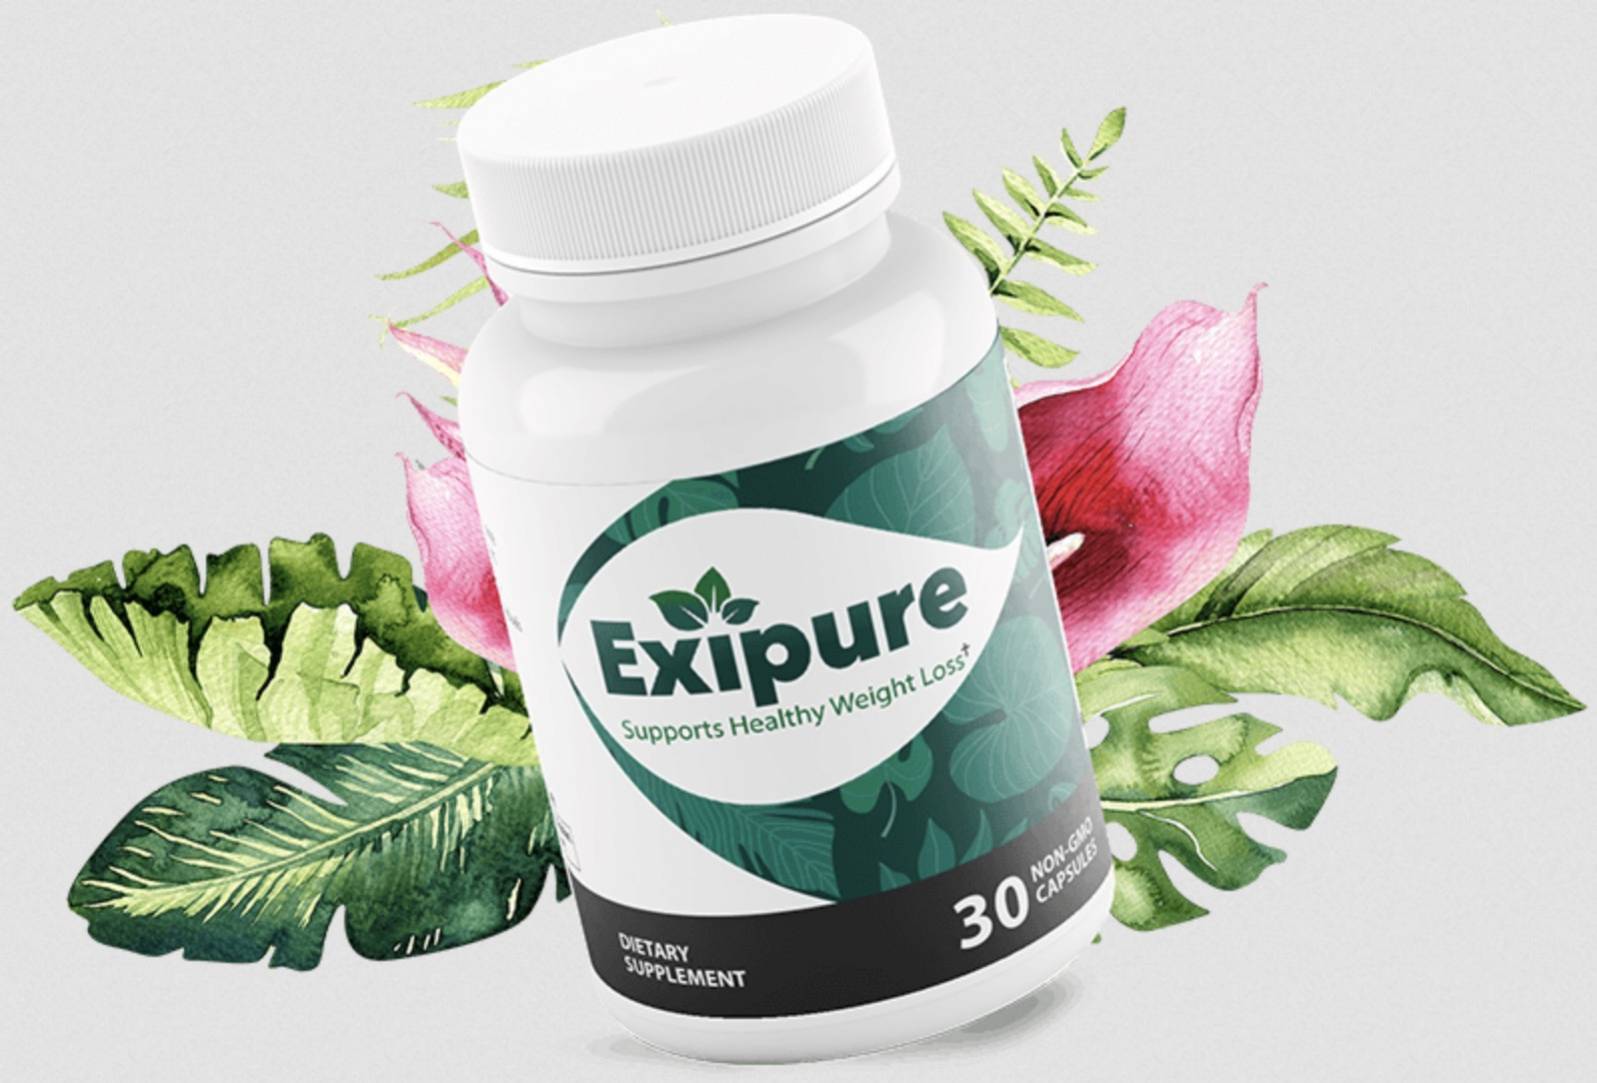 Exipure Tablets Reviews